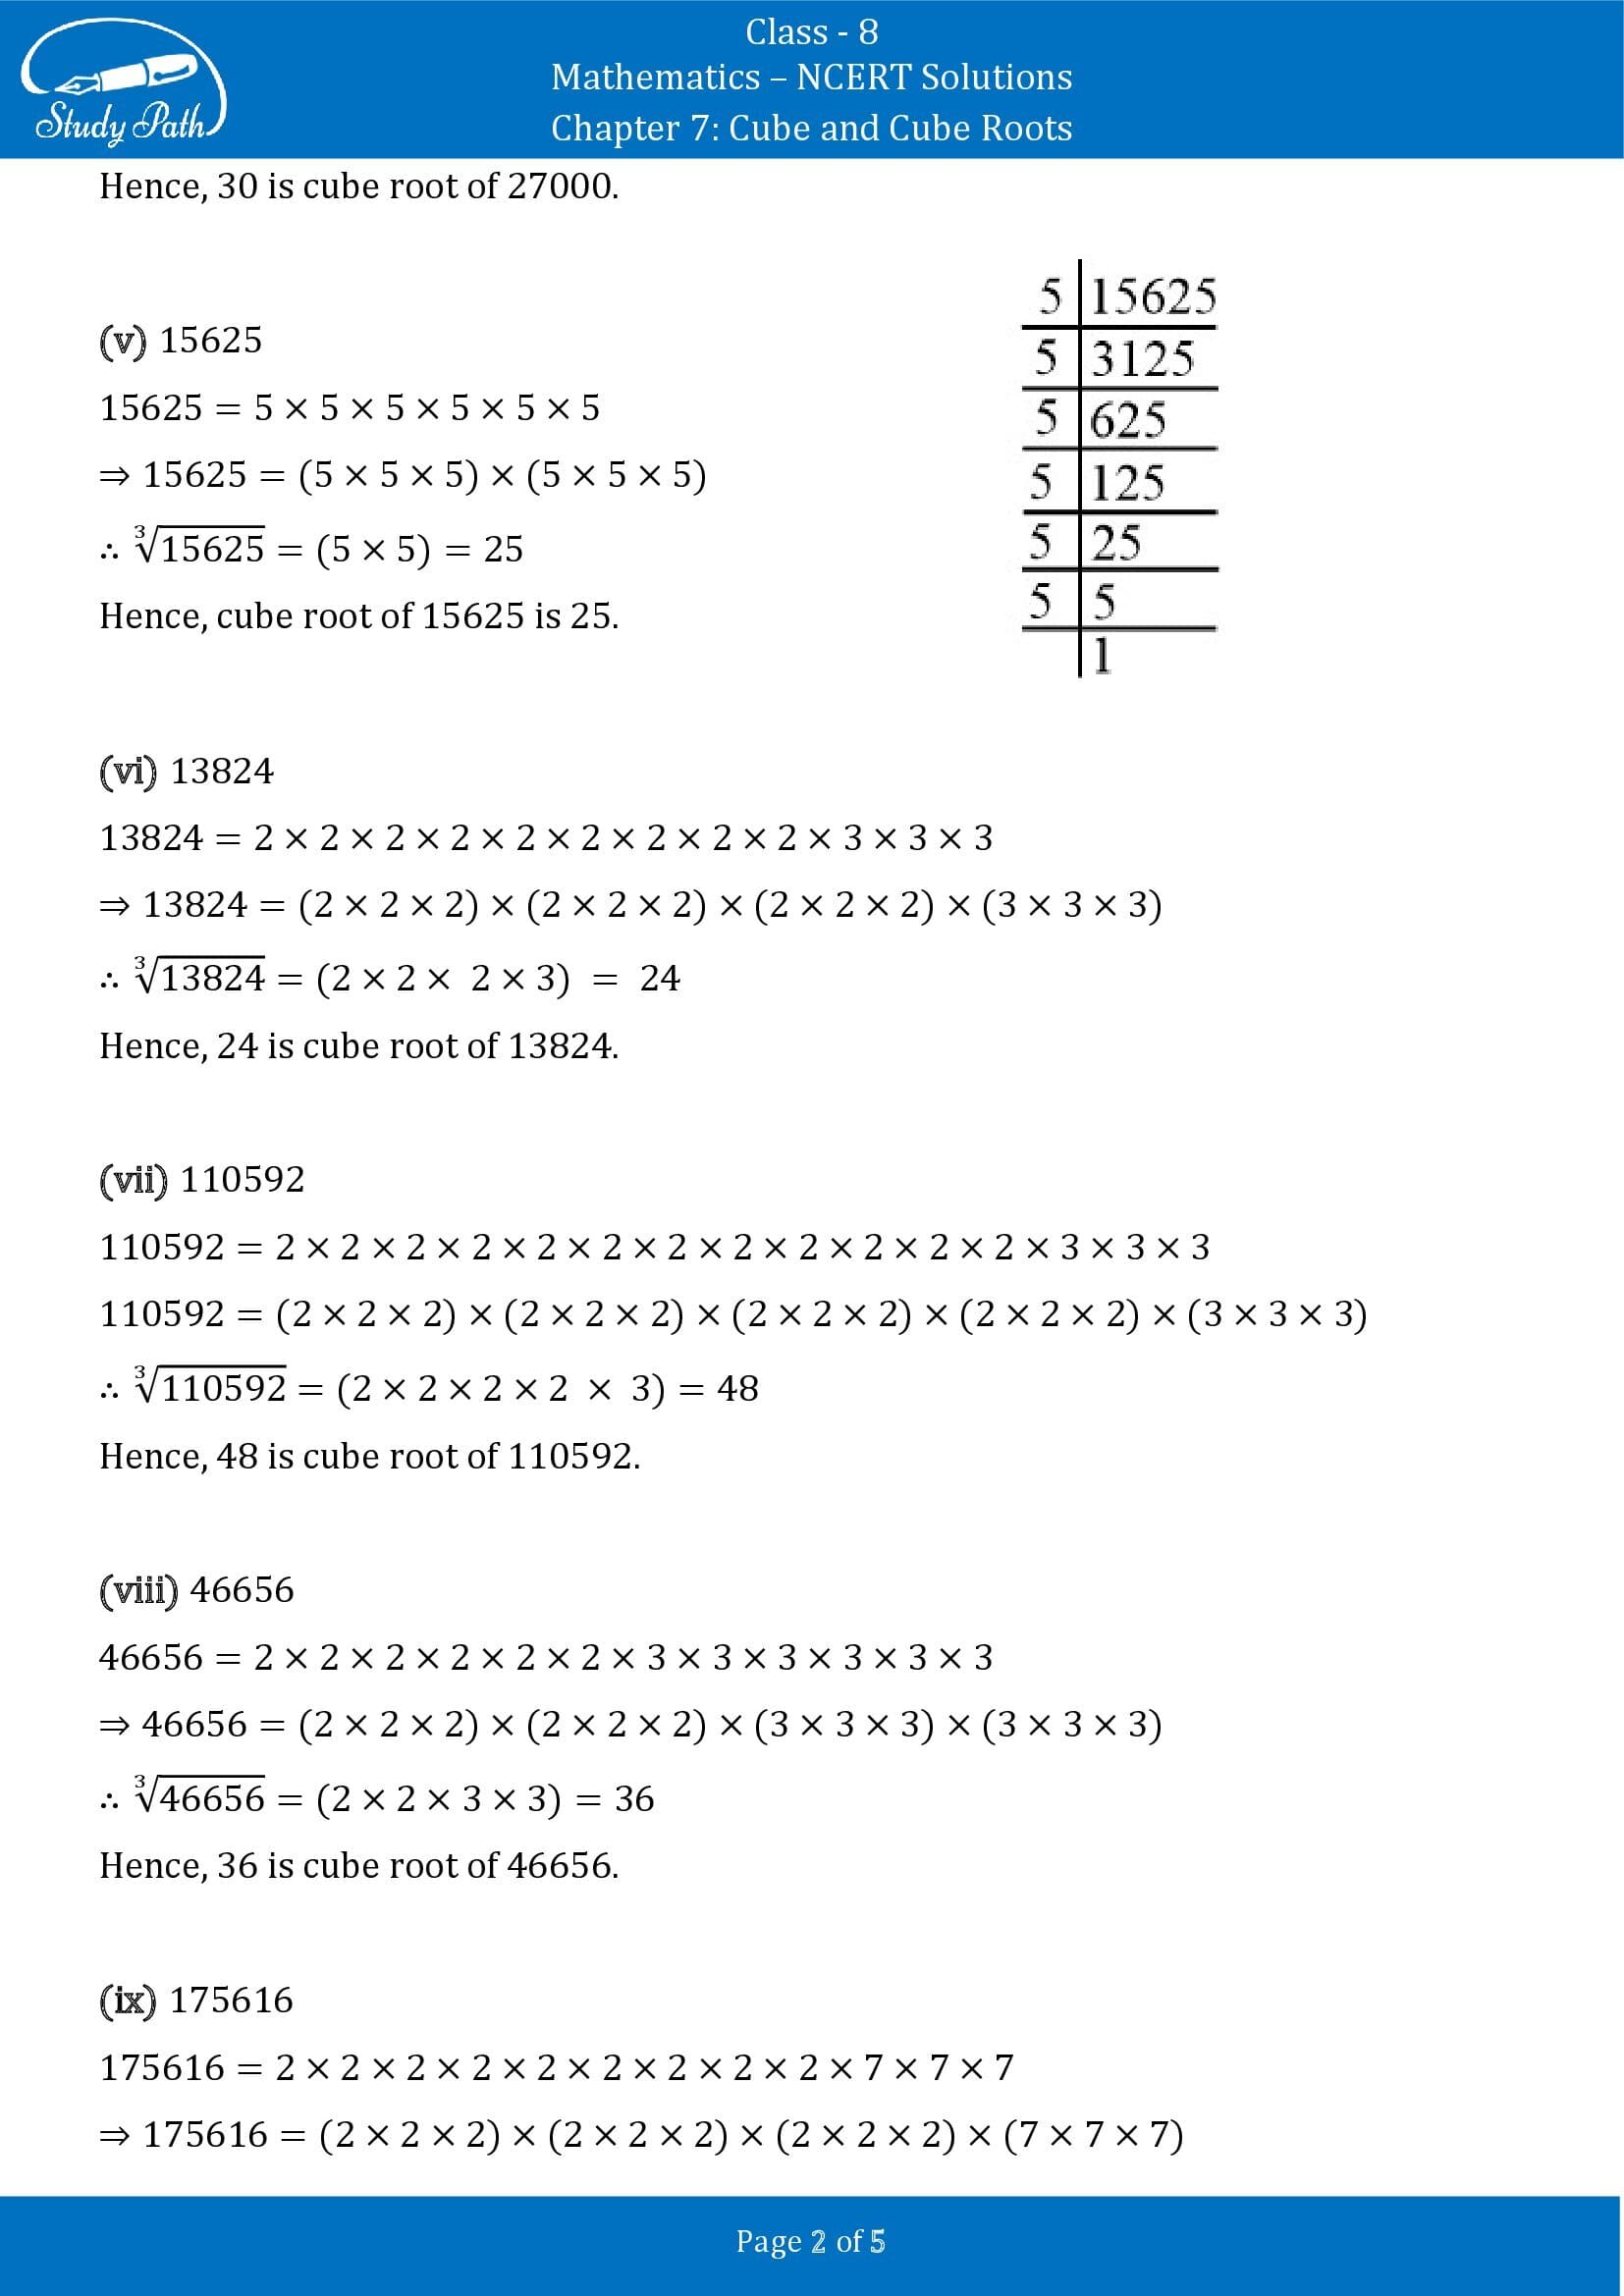 NCERT Solutions for Class 8 Maths Chapter 7 Cube and Cube Roots Exercise 7.2 00002